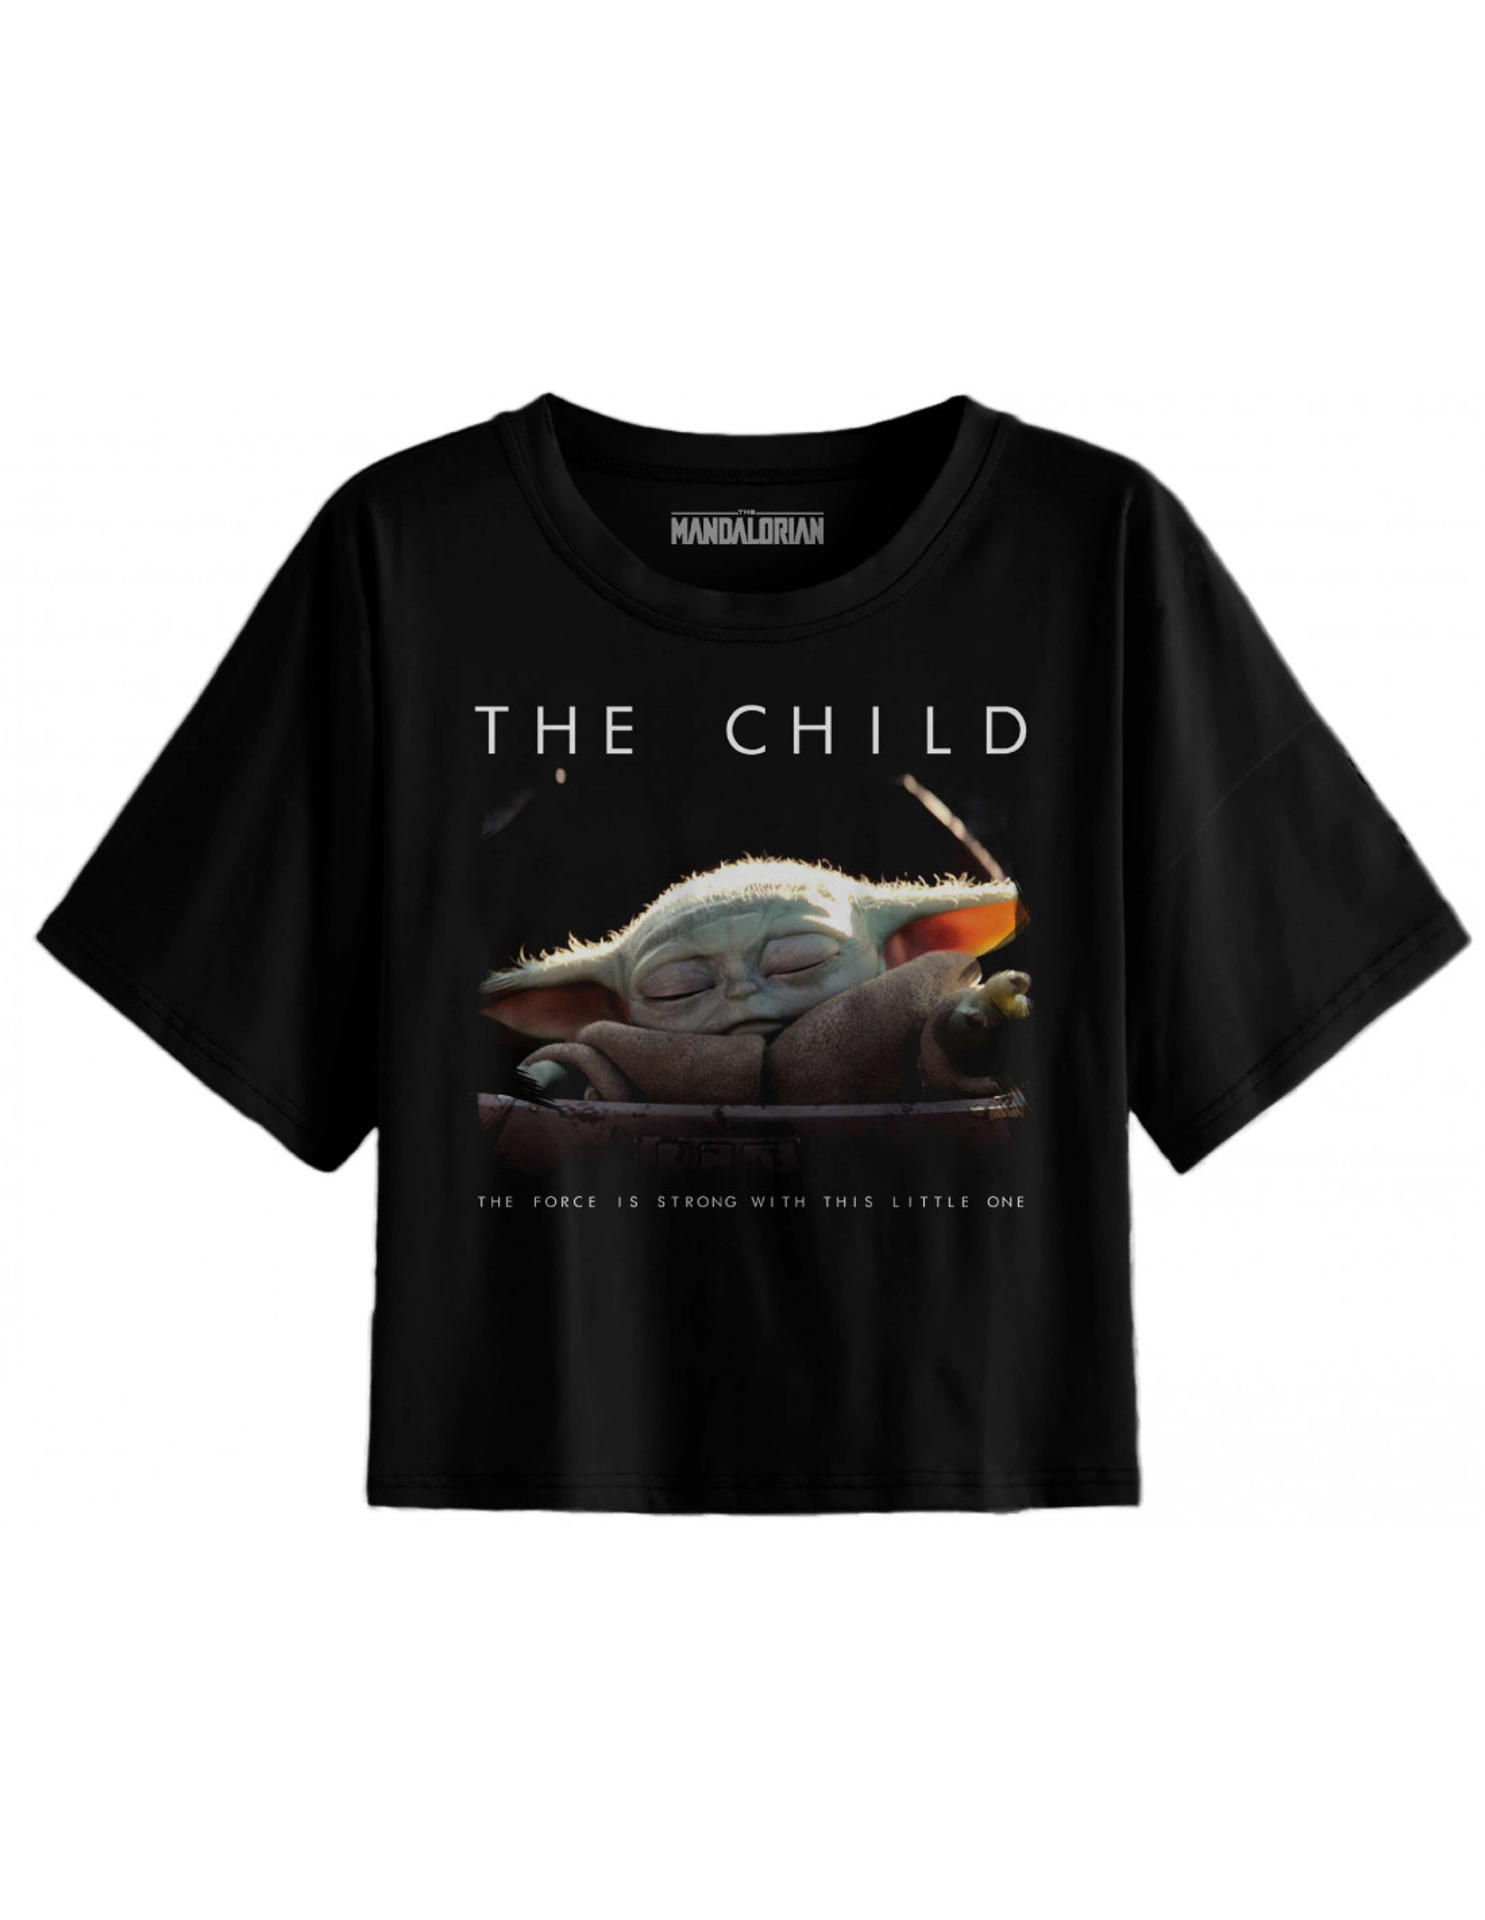 The Mandalorian - T-shirt Noir Femmes Logo The Child "The Force is Strong with this Little One" - L